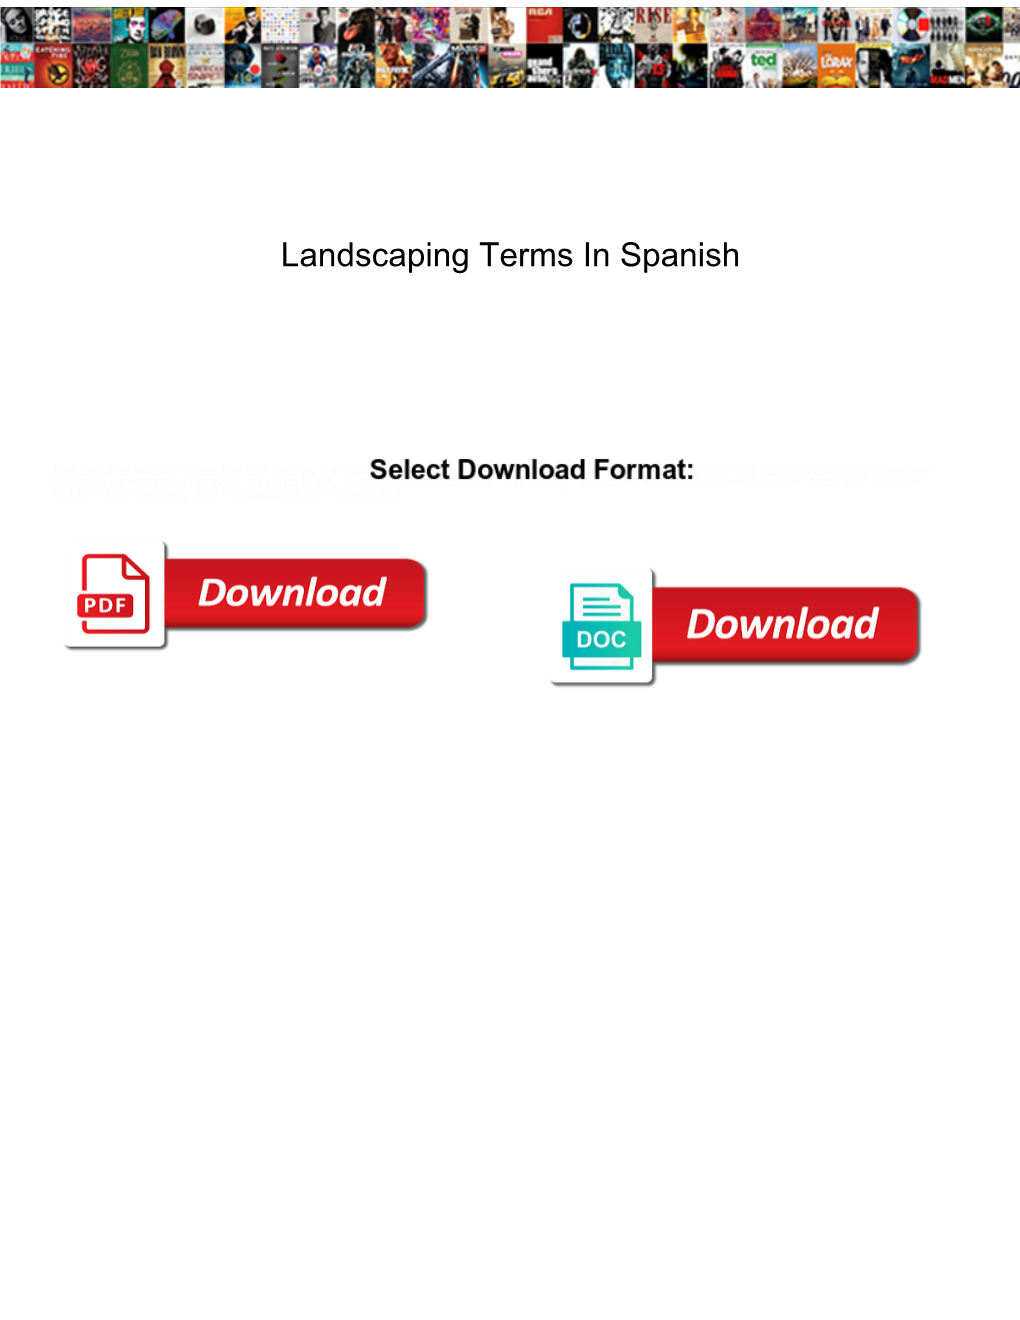 Landscaping Terms in Spanish